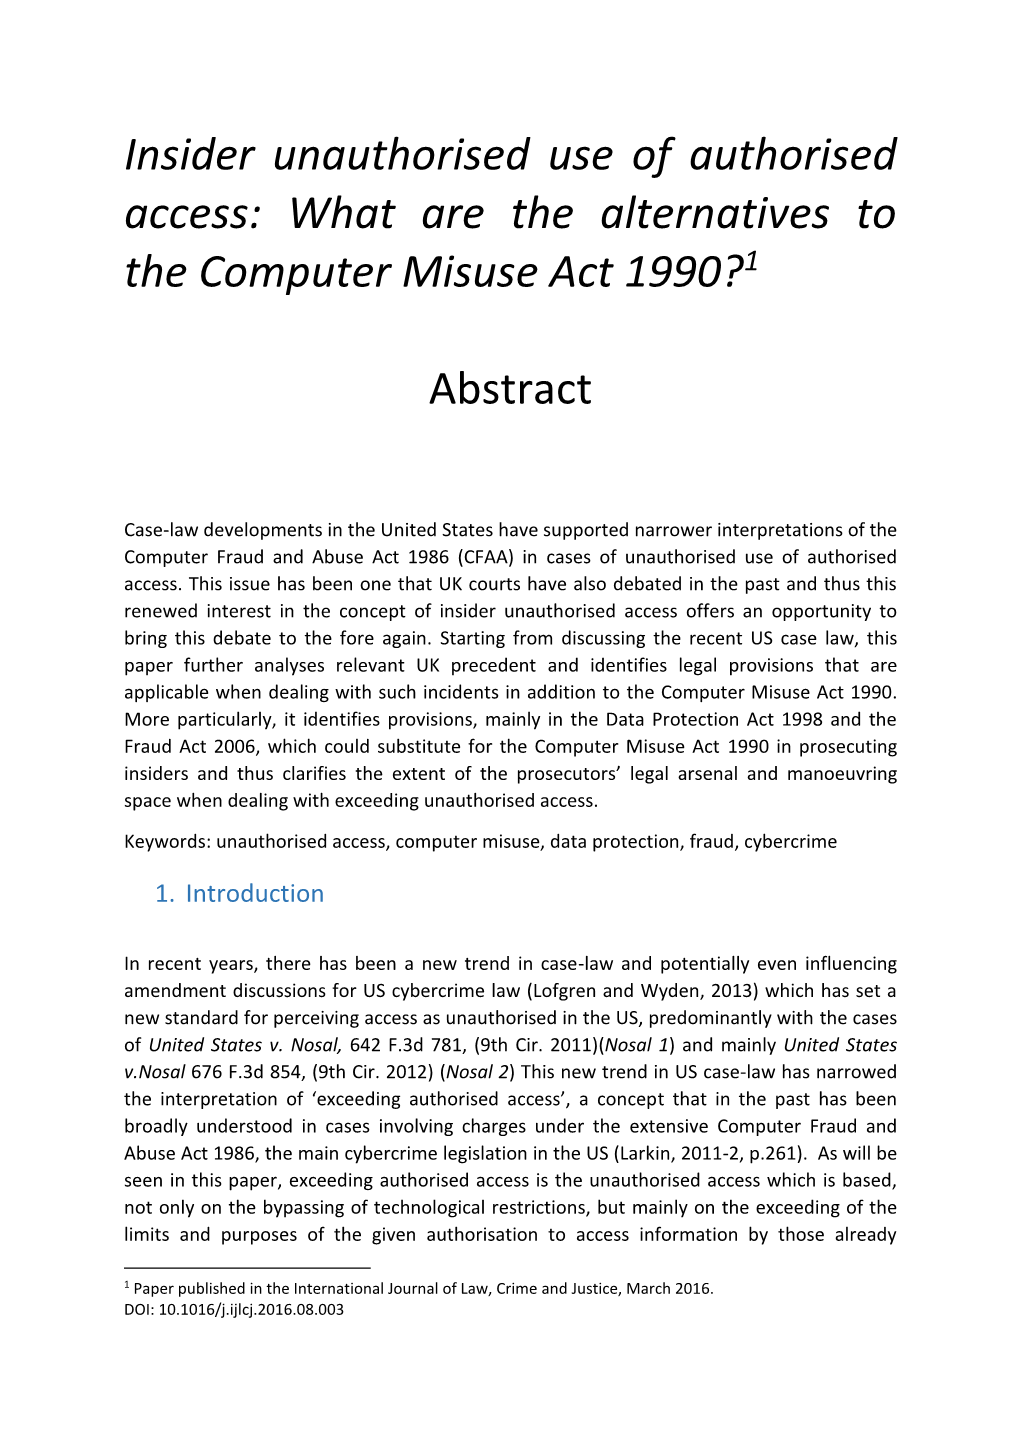 Insider Unauthorised Use of Authorised Access: What Are the Alternatives to the Computer Misuse Act 1990?1